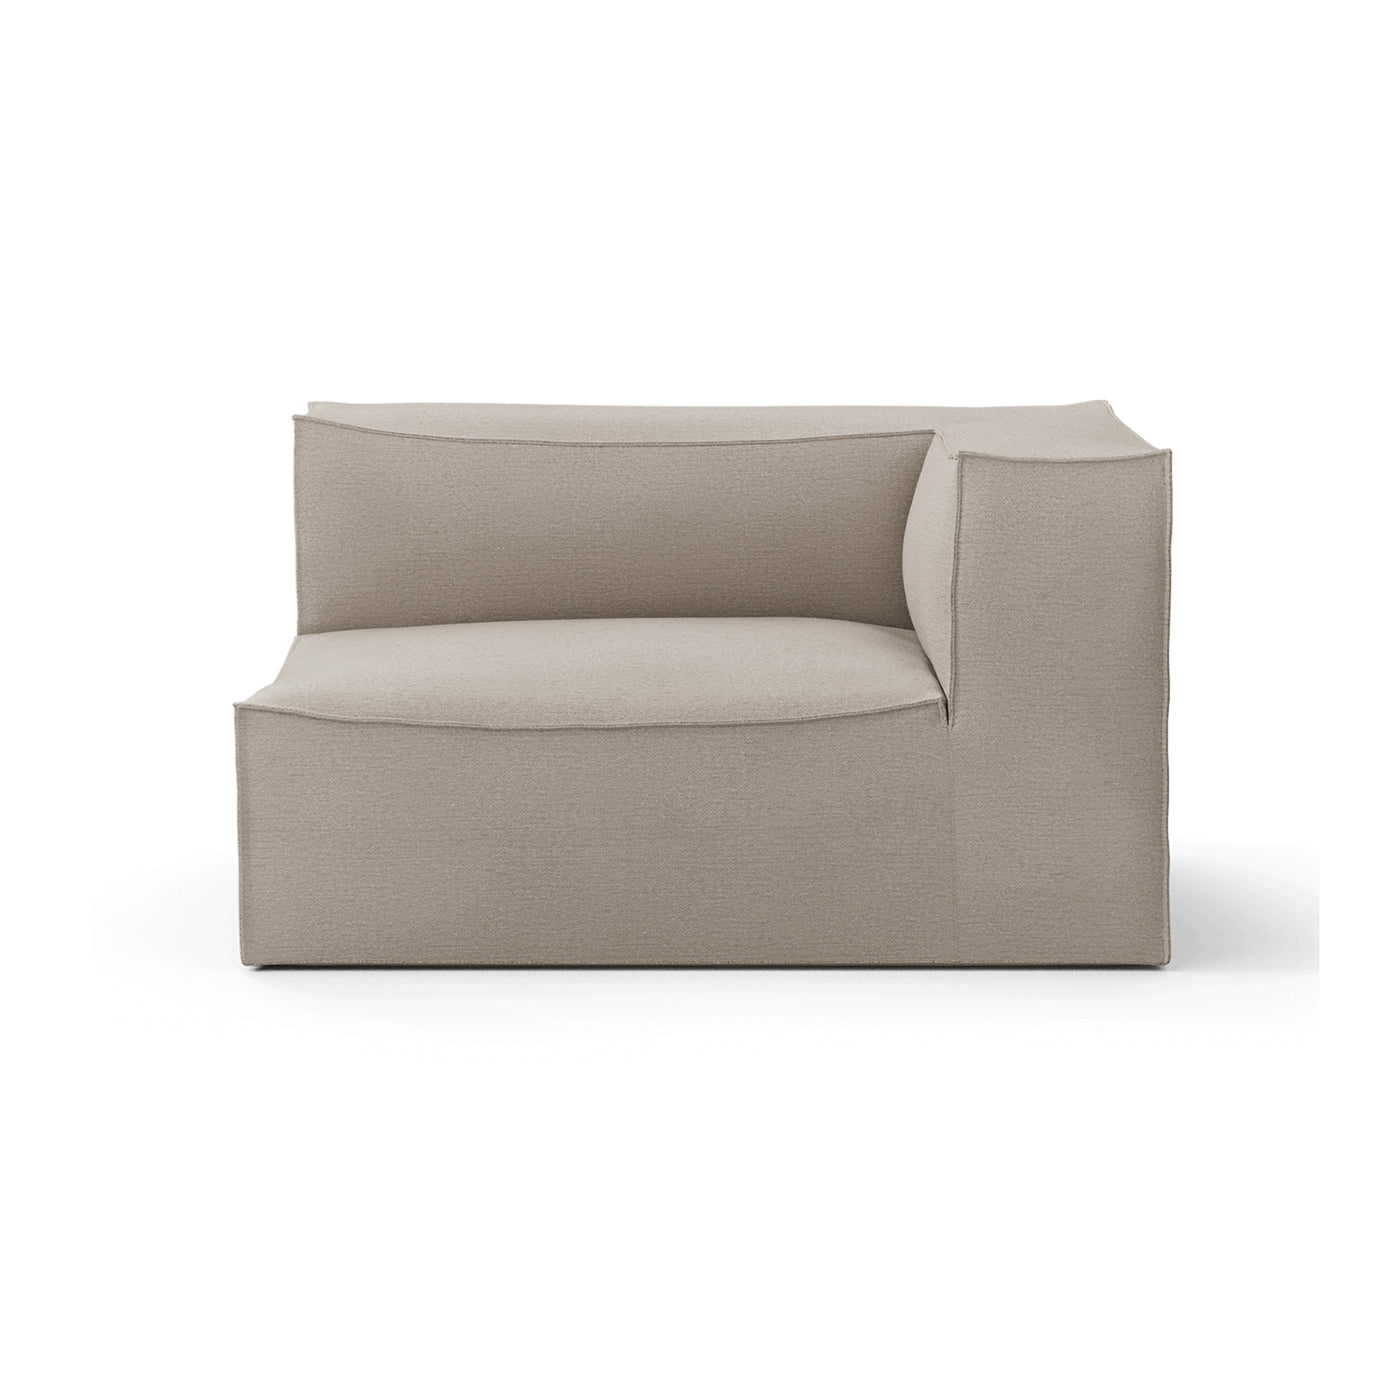 ferm LIVING Catena modualr sofa in cotton linen. Made to order from someday designs.